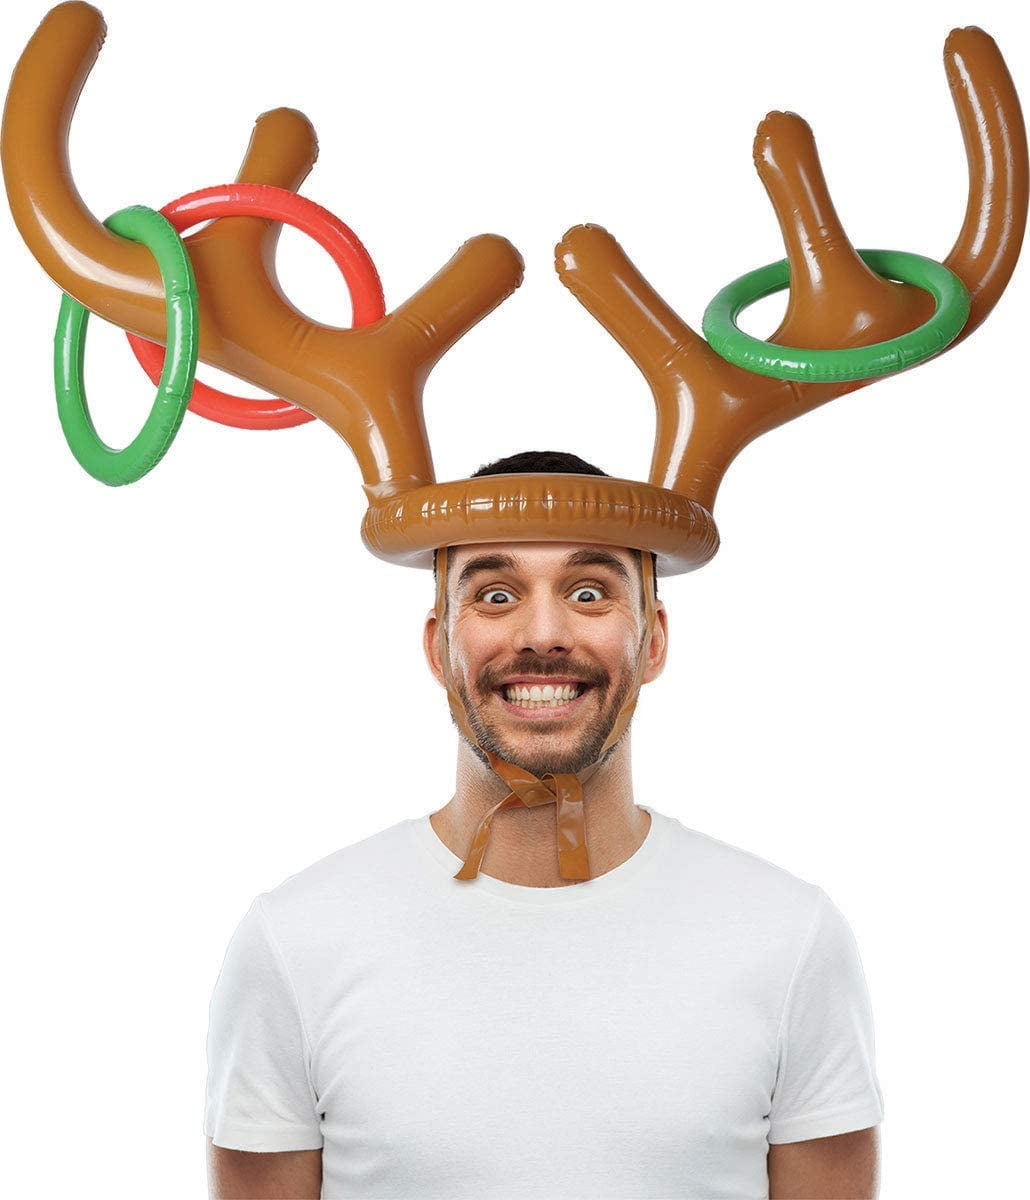 16 Rings 4 Antlers JOINBO Christmas Inflatable Reindeer Antler Ring Toss Games Toy for Christmas Party Games 4 Set 